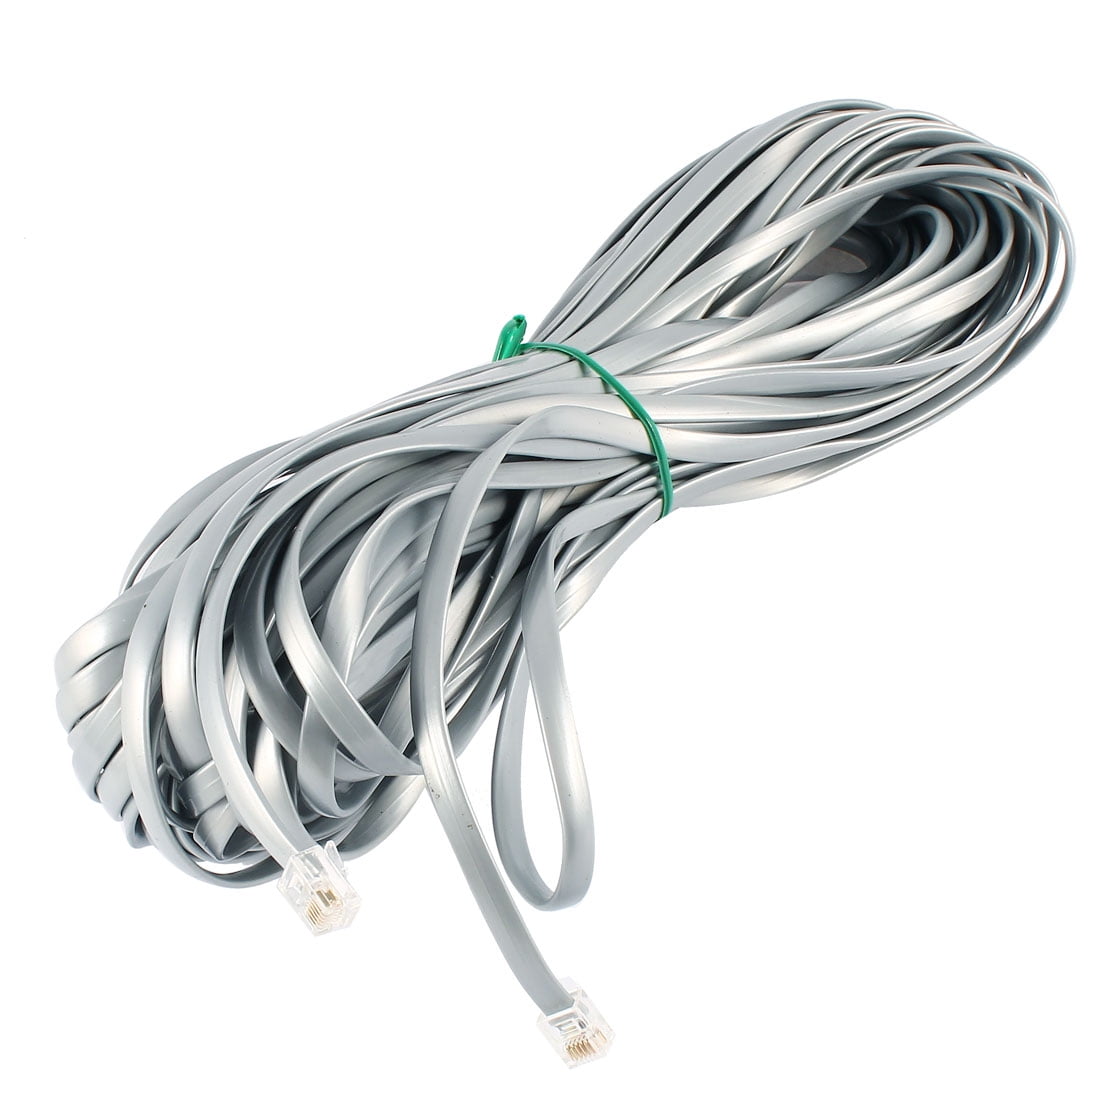 25ft Phone Cable Wire RJ12 RJ-12 6P6C Straight FOR DATA Telephone Line Cord 